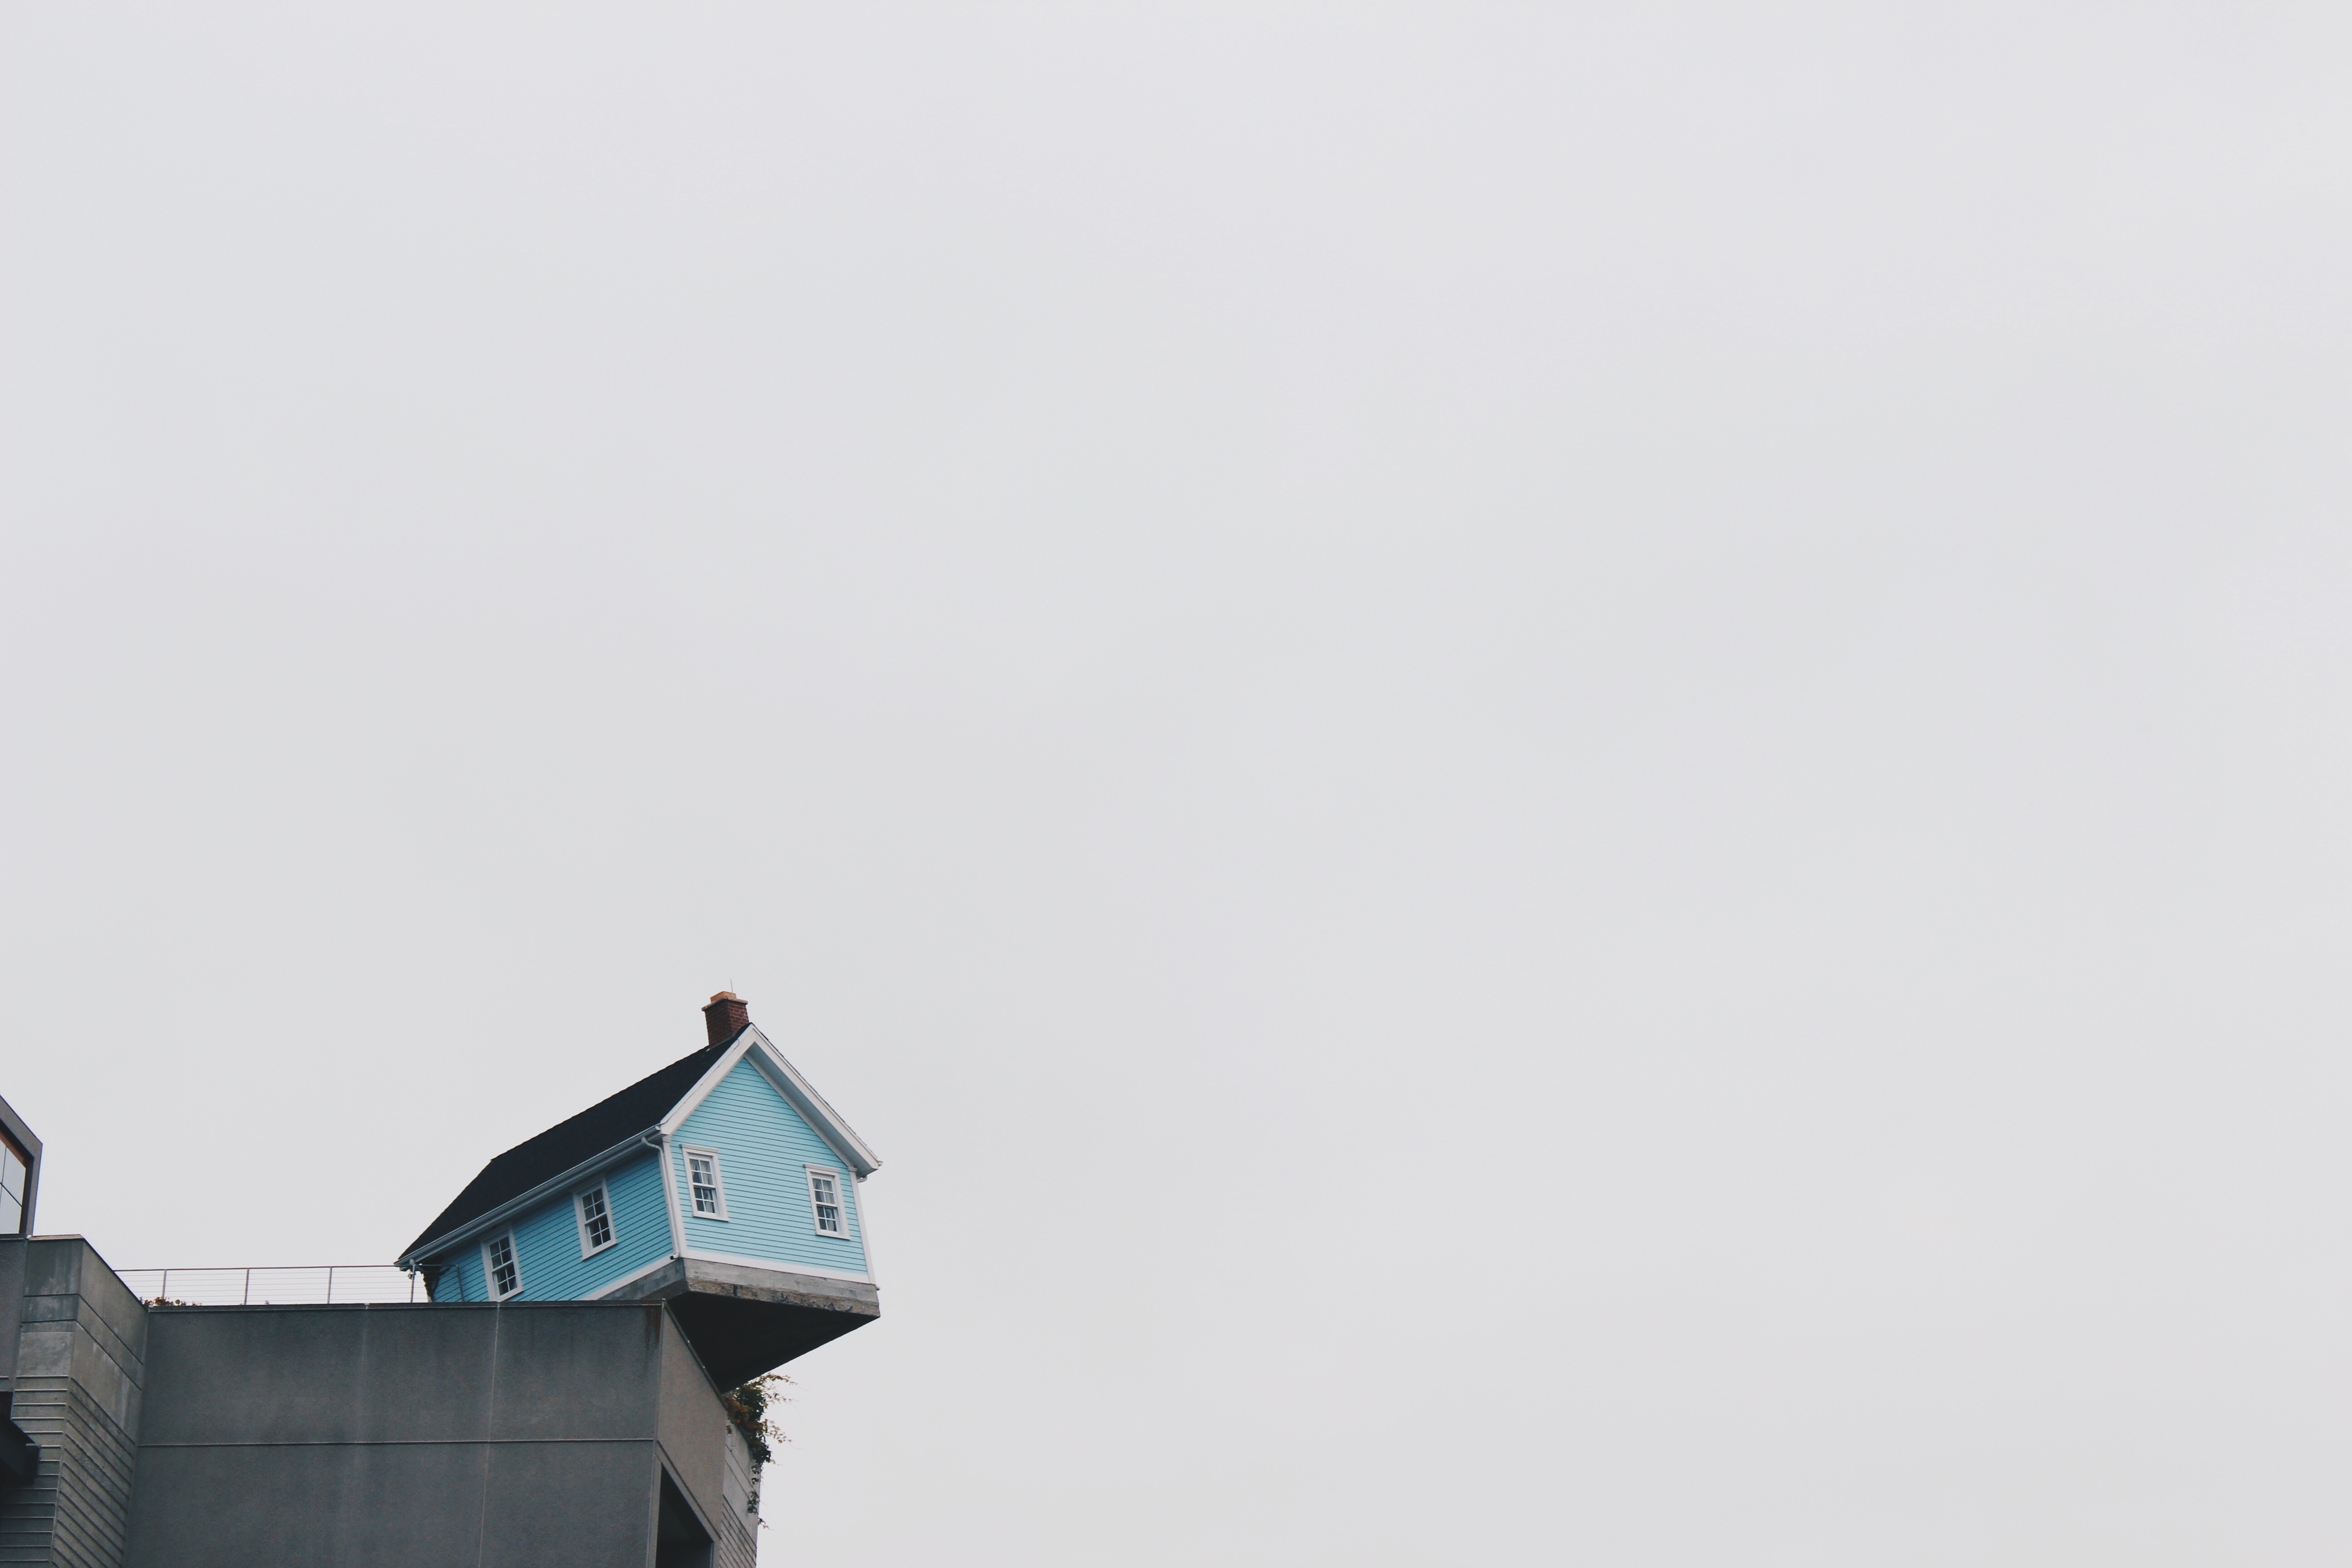 Image of a blue house on the edge of a concrete structure.